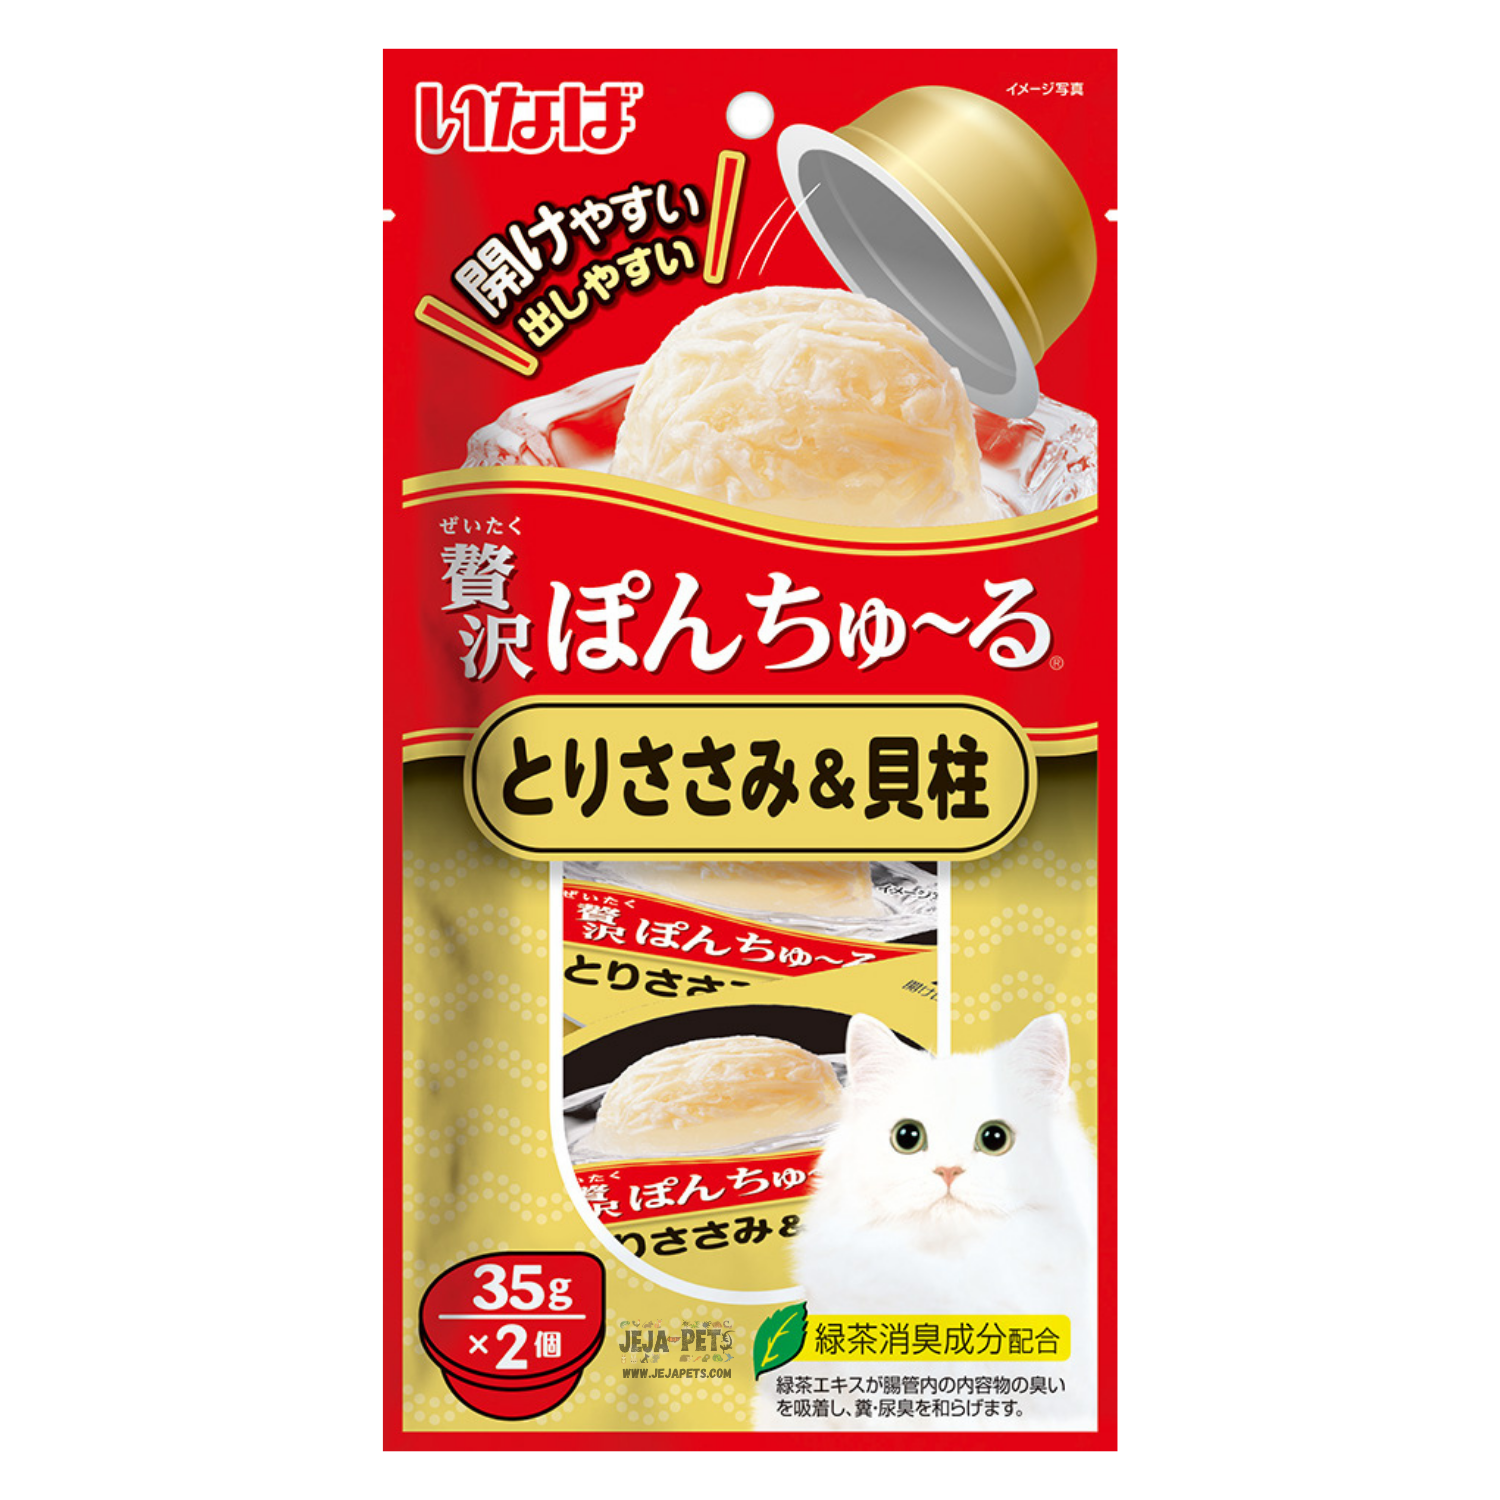 Ciao Pon Churu Chicken Fillet with Scallop - 35g x 2